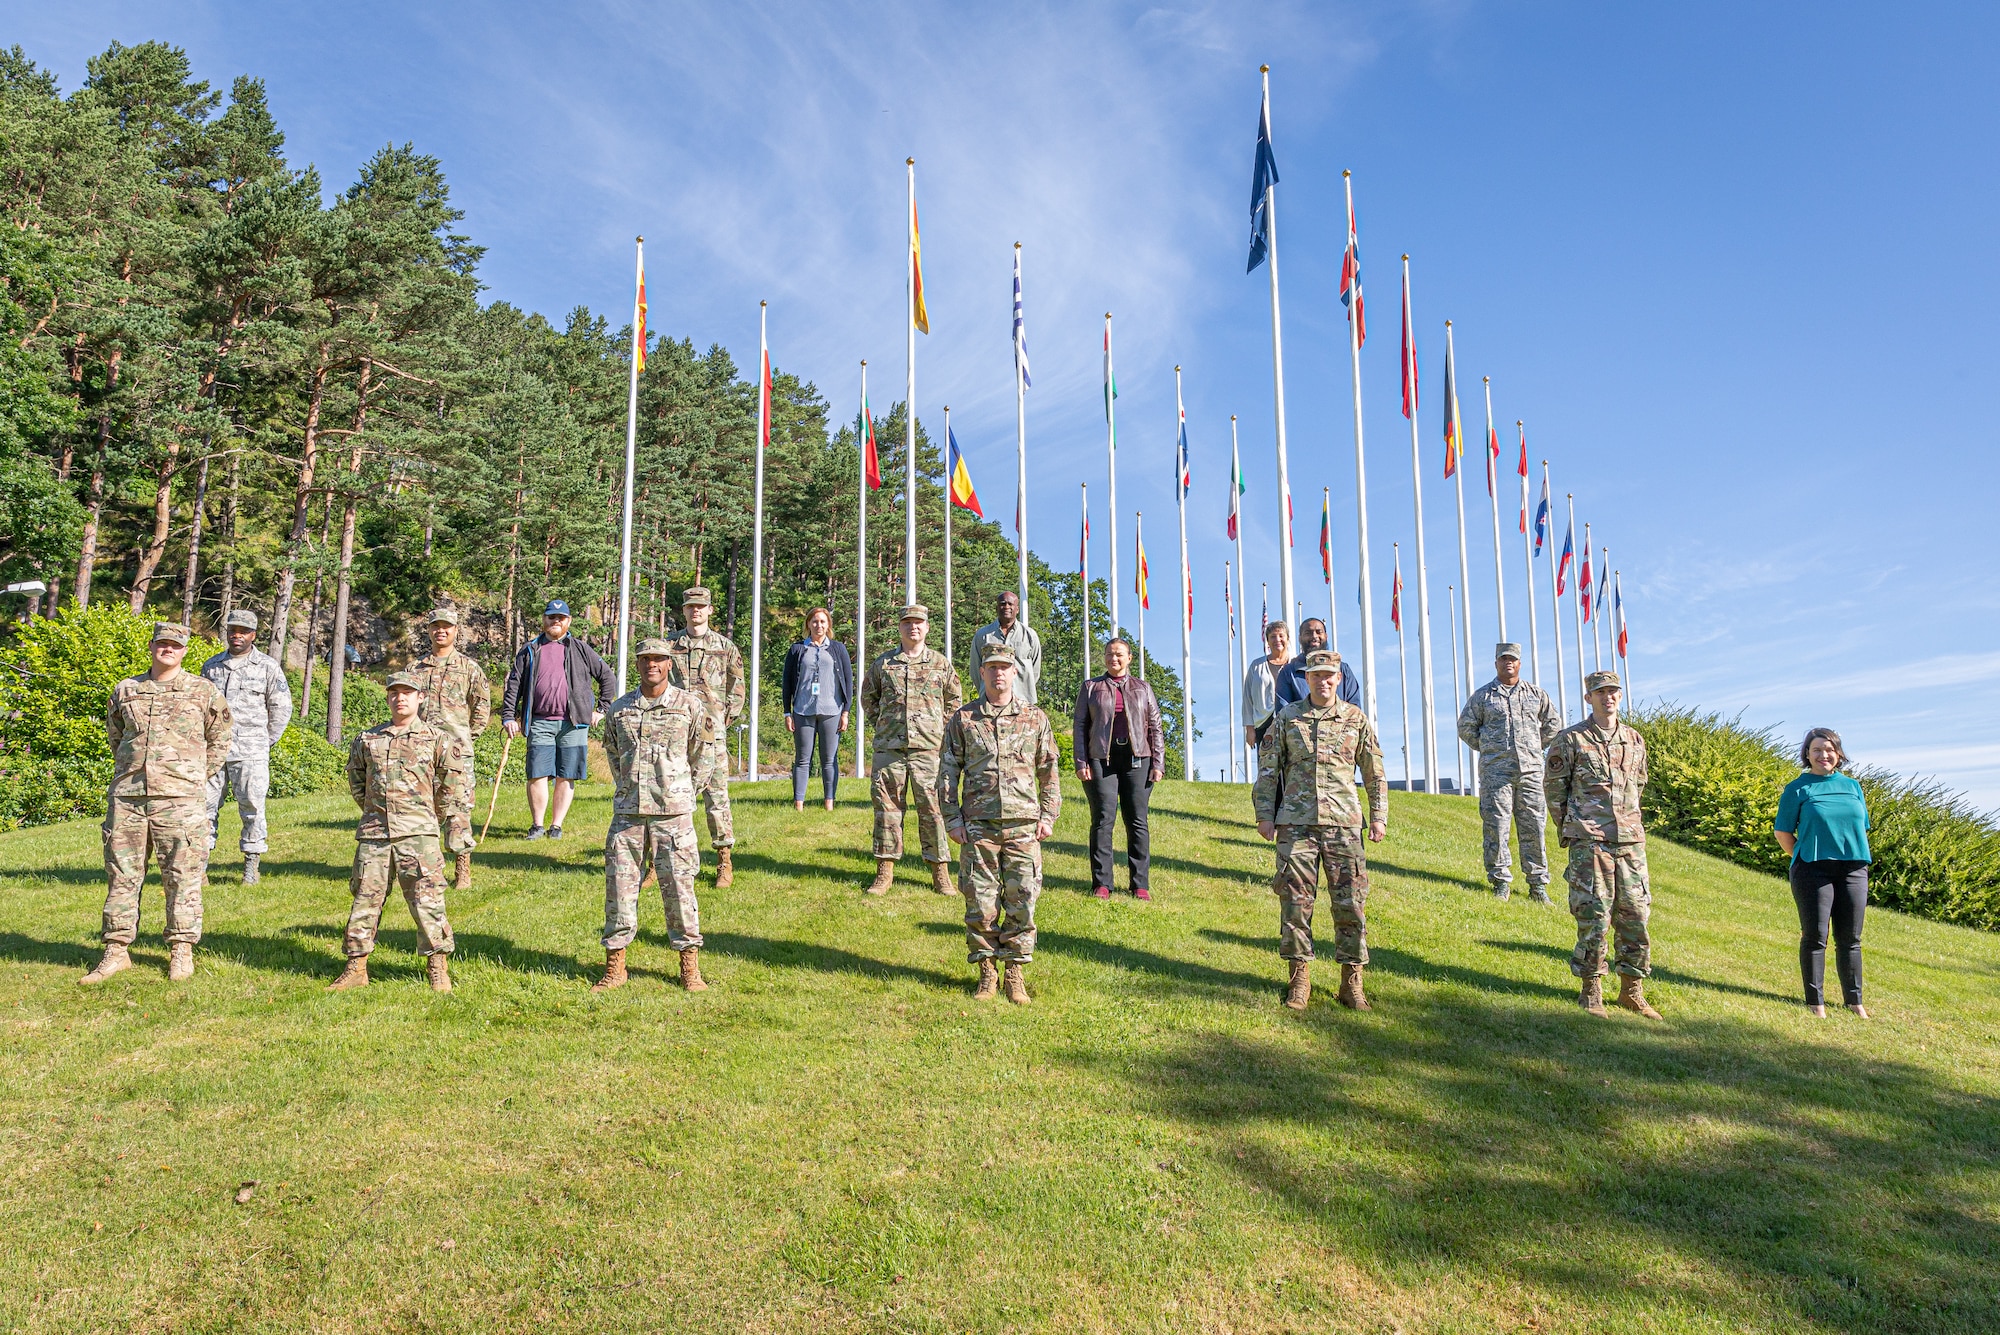 426th Air Base Squadron members pose for a group photo in Stavanger, Norway. (Courtesy photo)